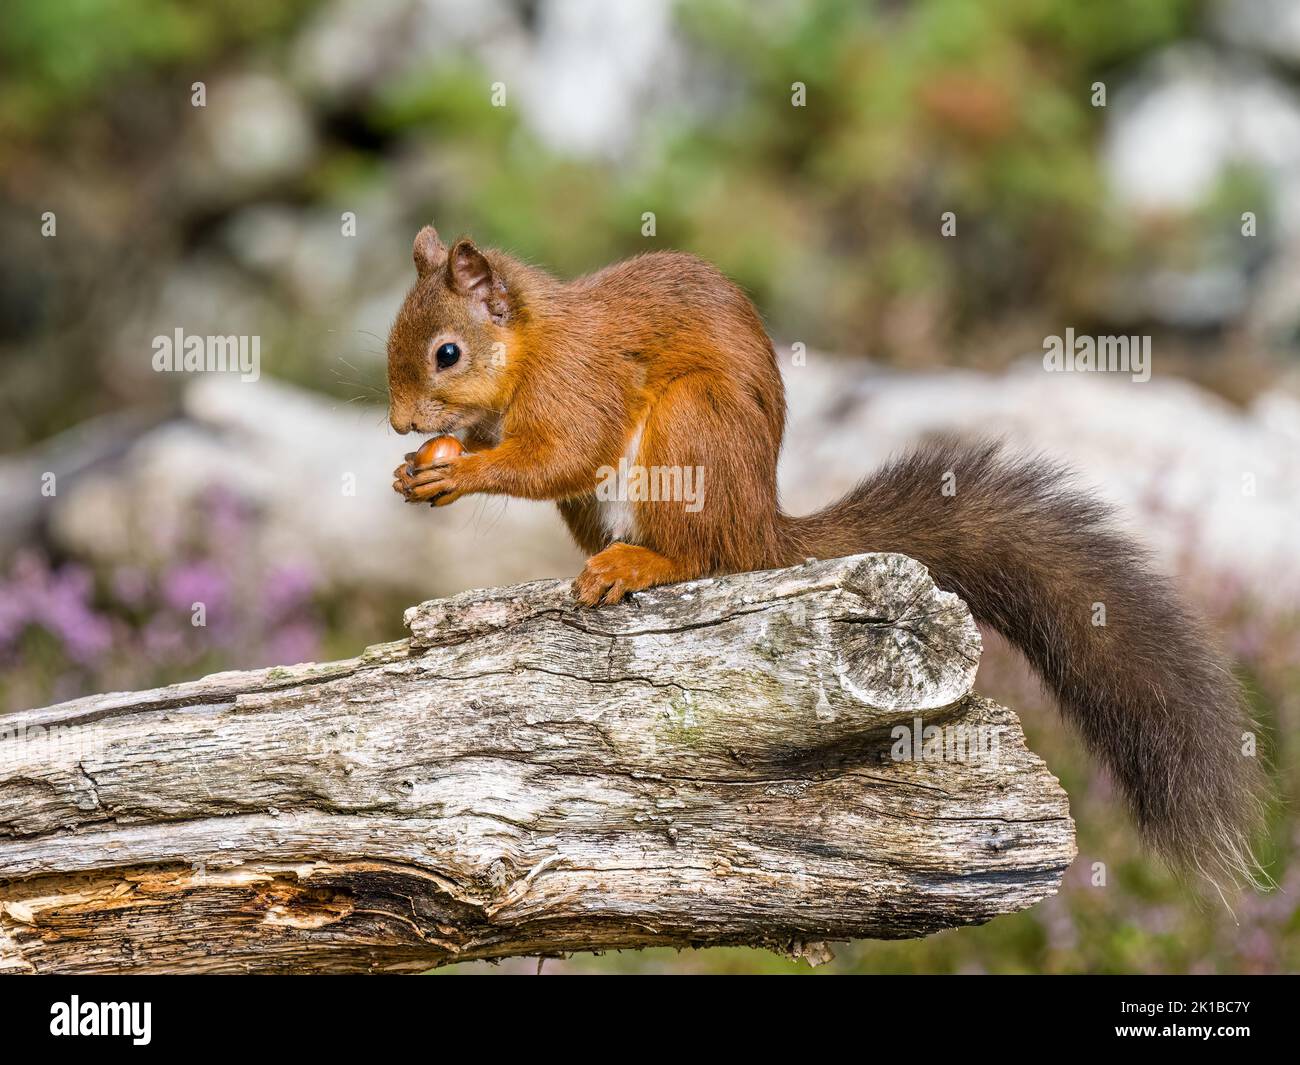 The native red squirrel in Scottish woodlands Stock Photo